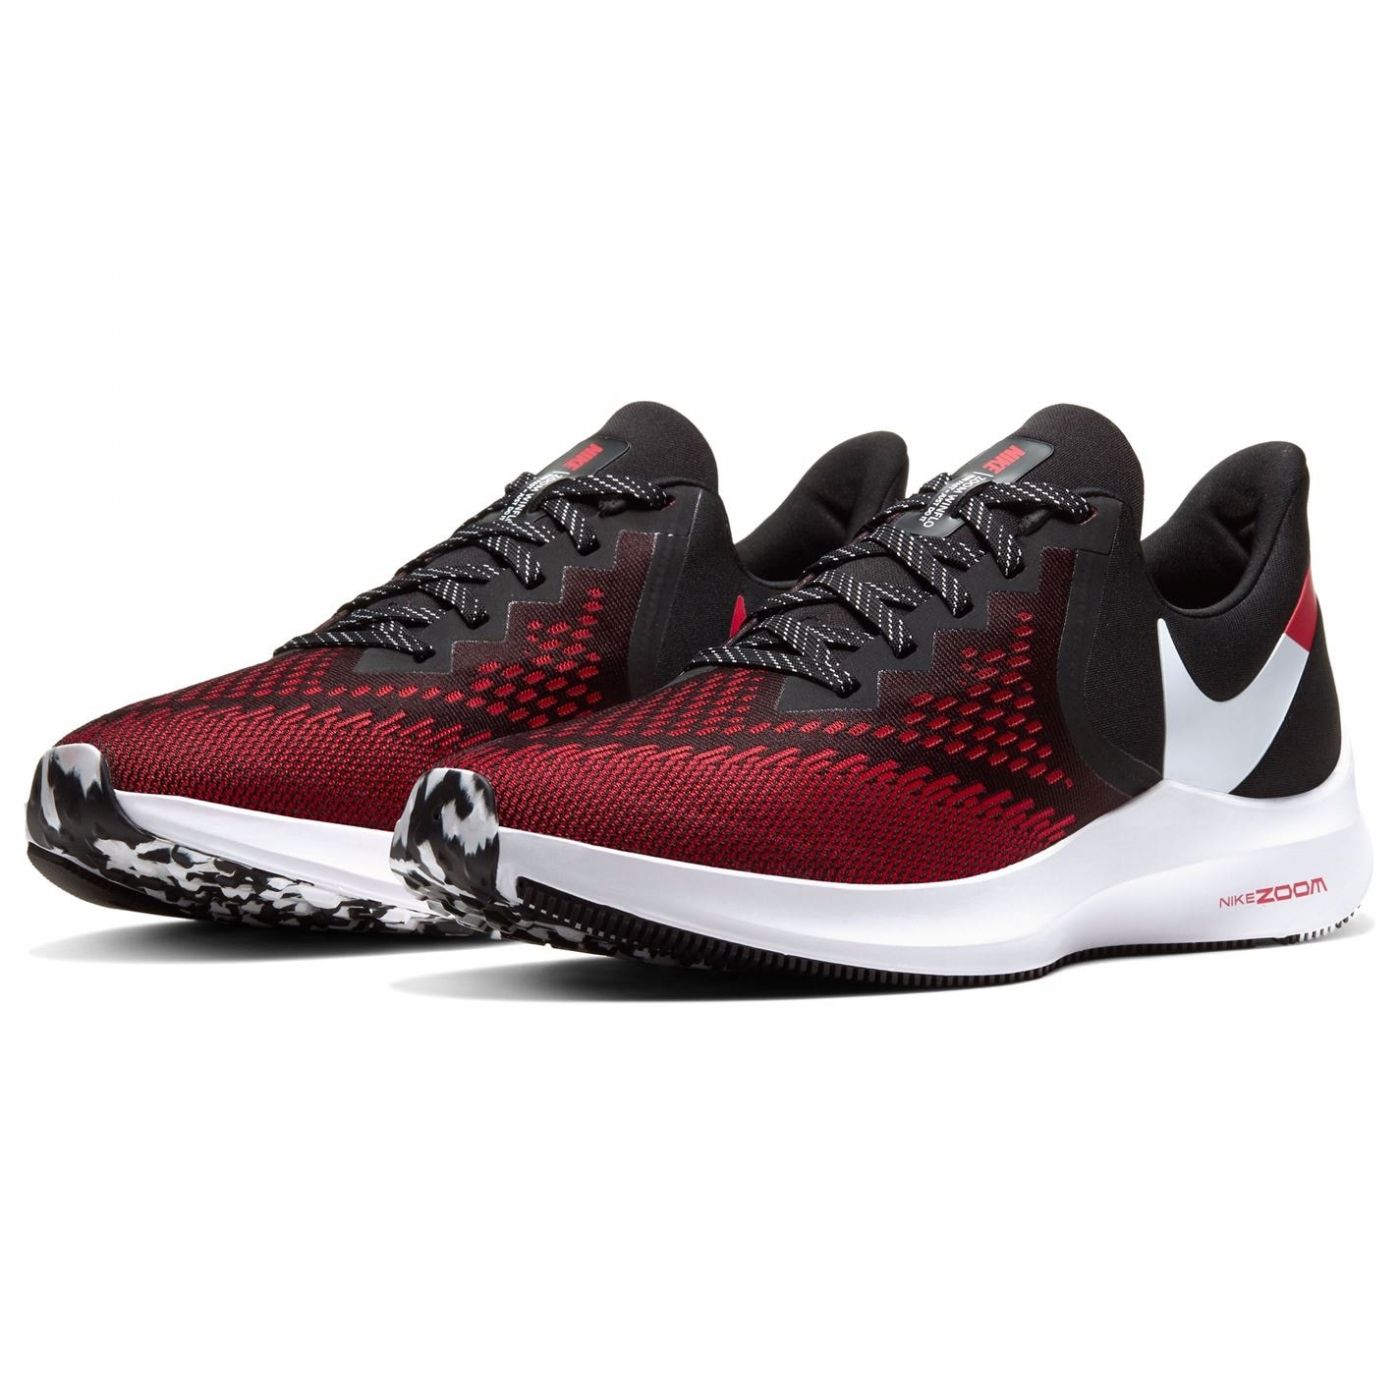 Nike Air Zoom Winflo 6 Mens Running Shoes